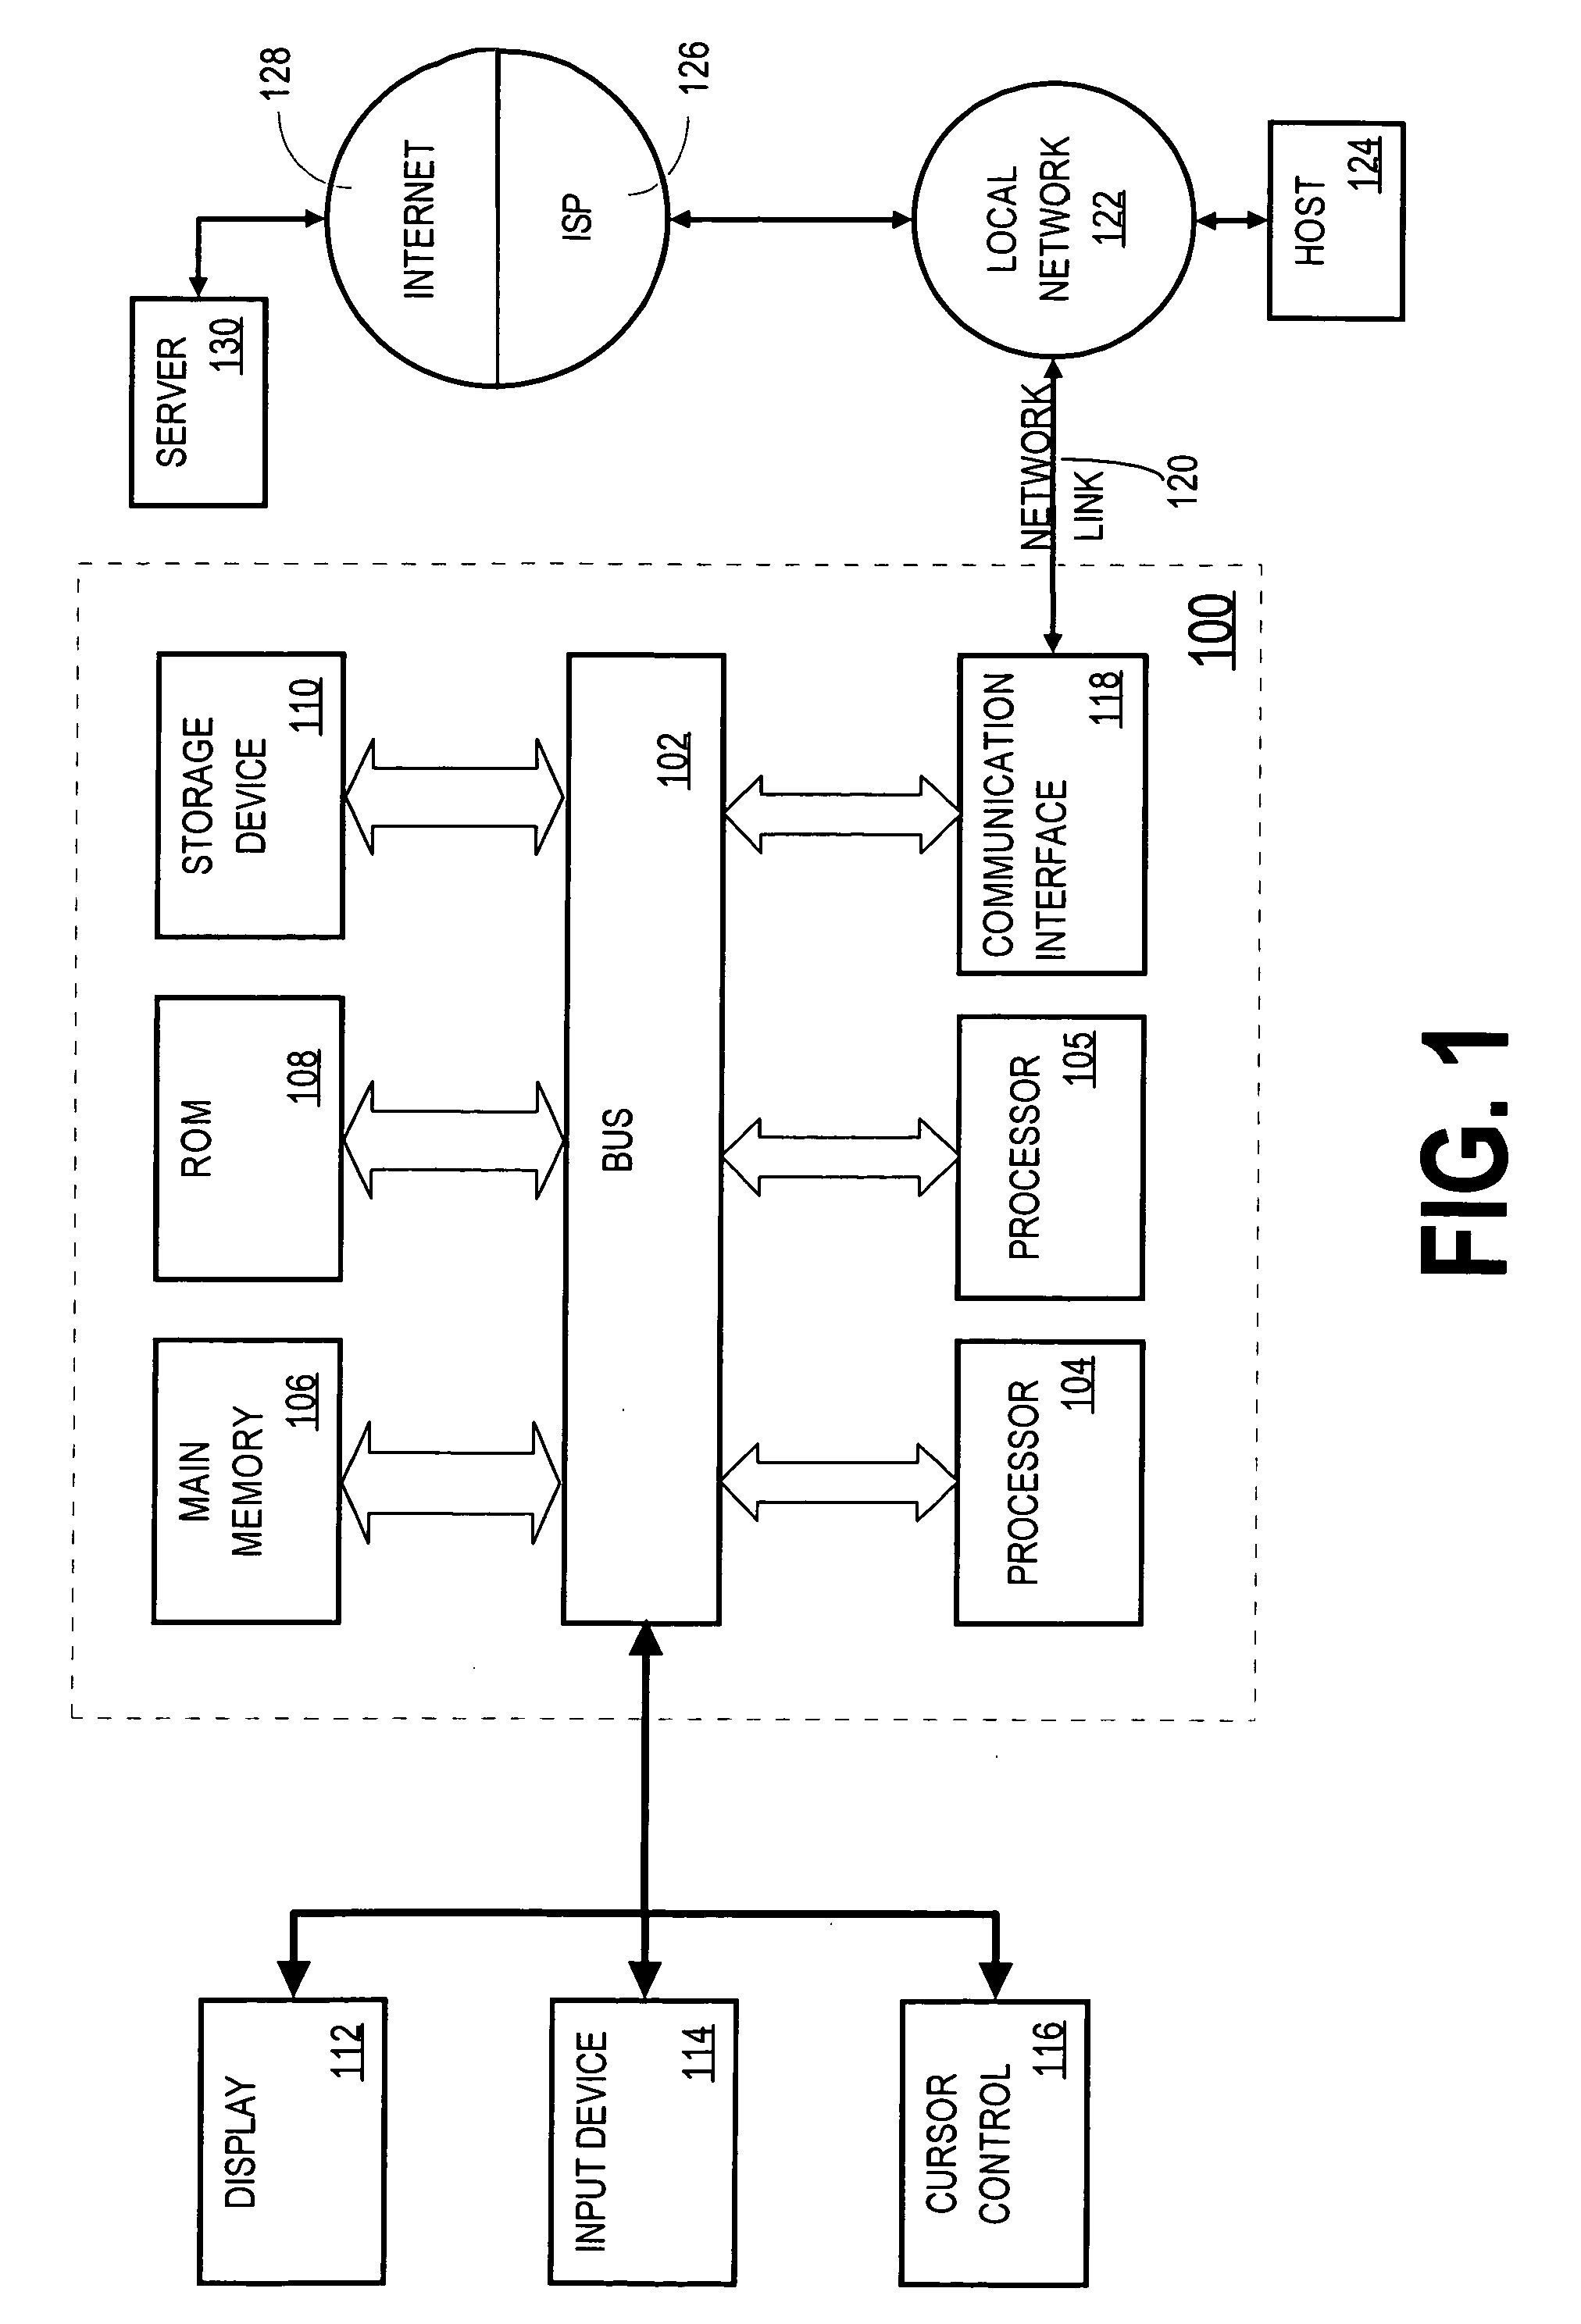 System and methodology for supporting a platform independent object format for a run-time environment